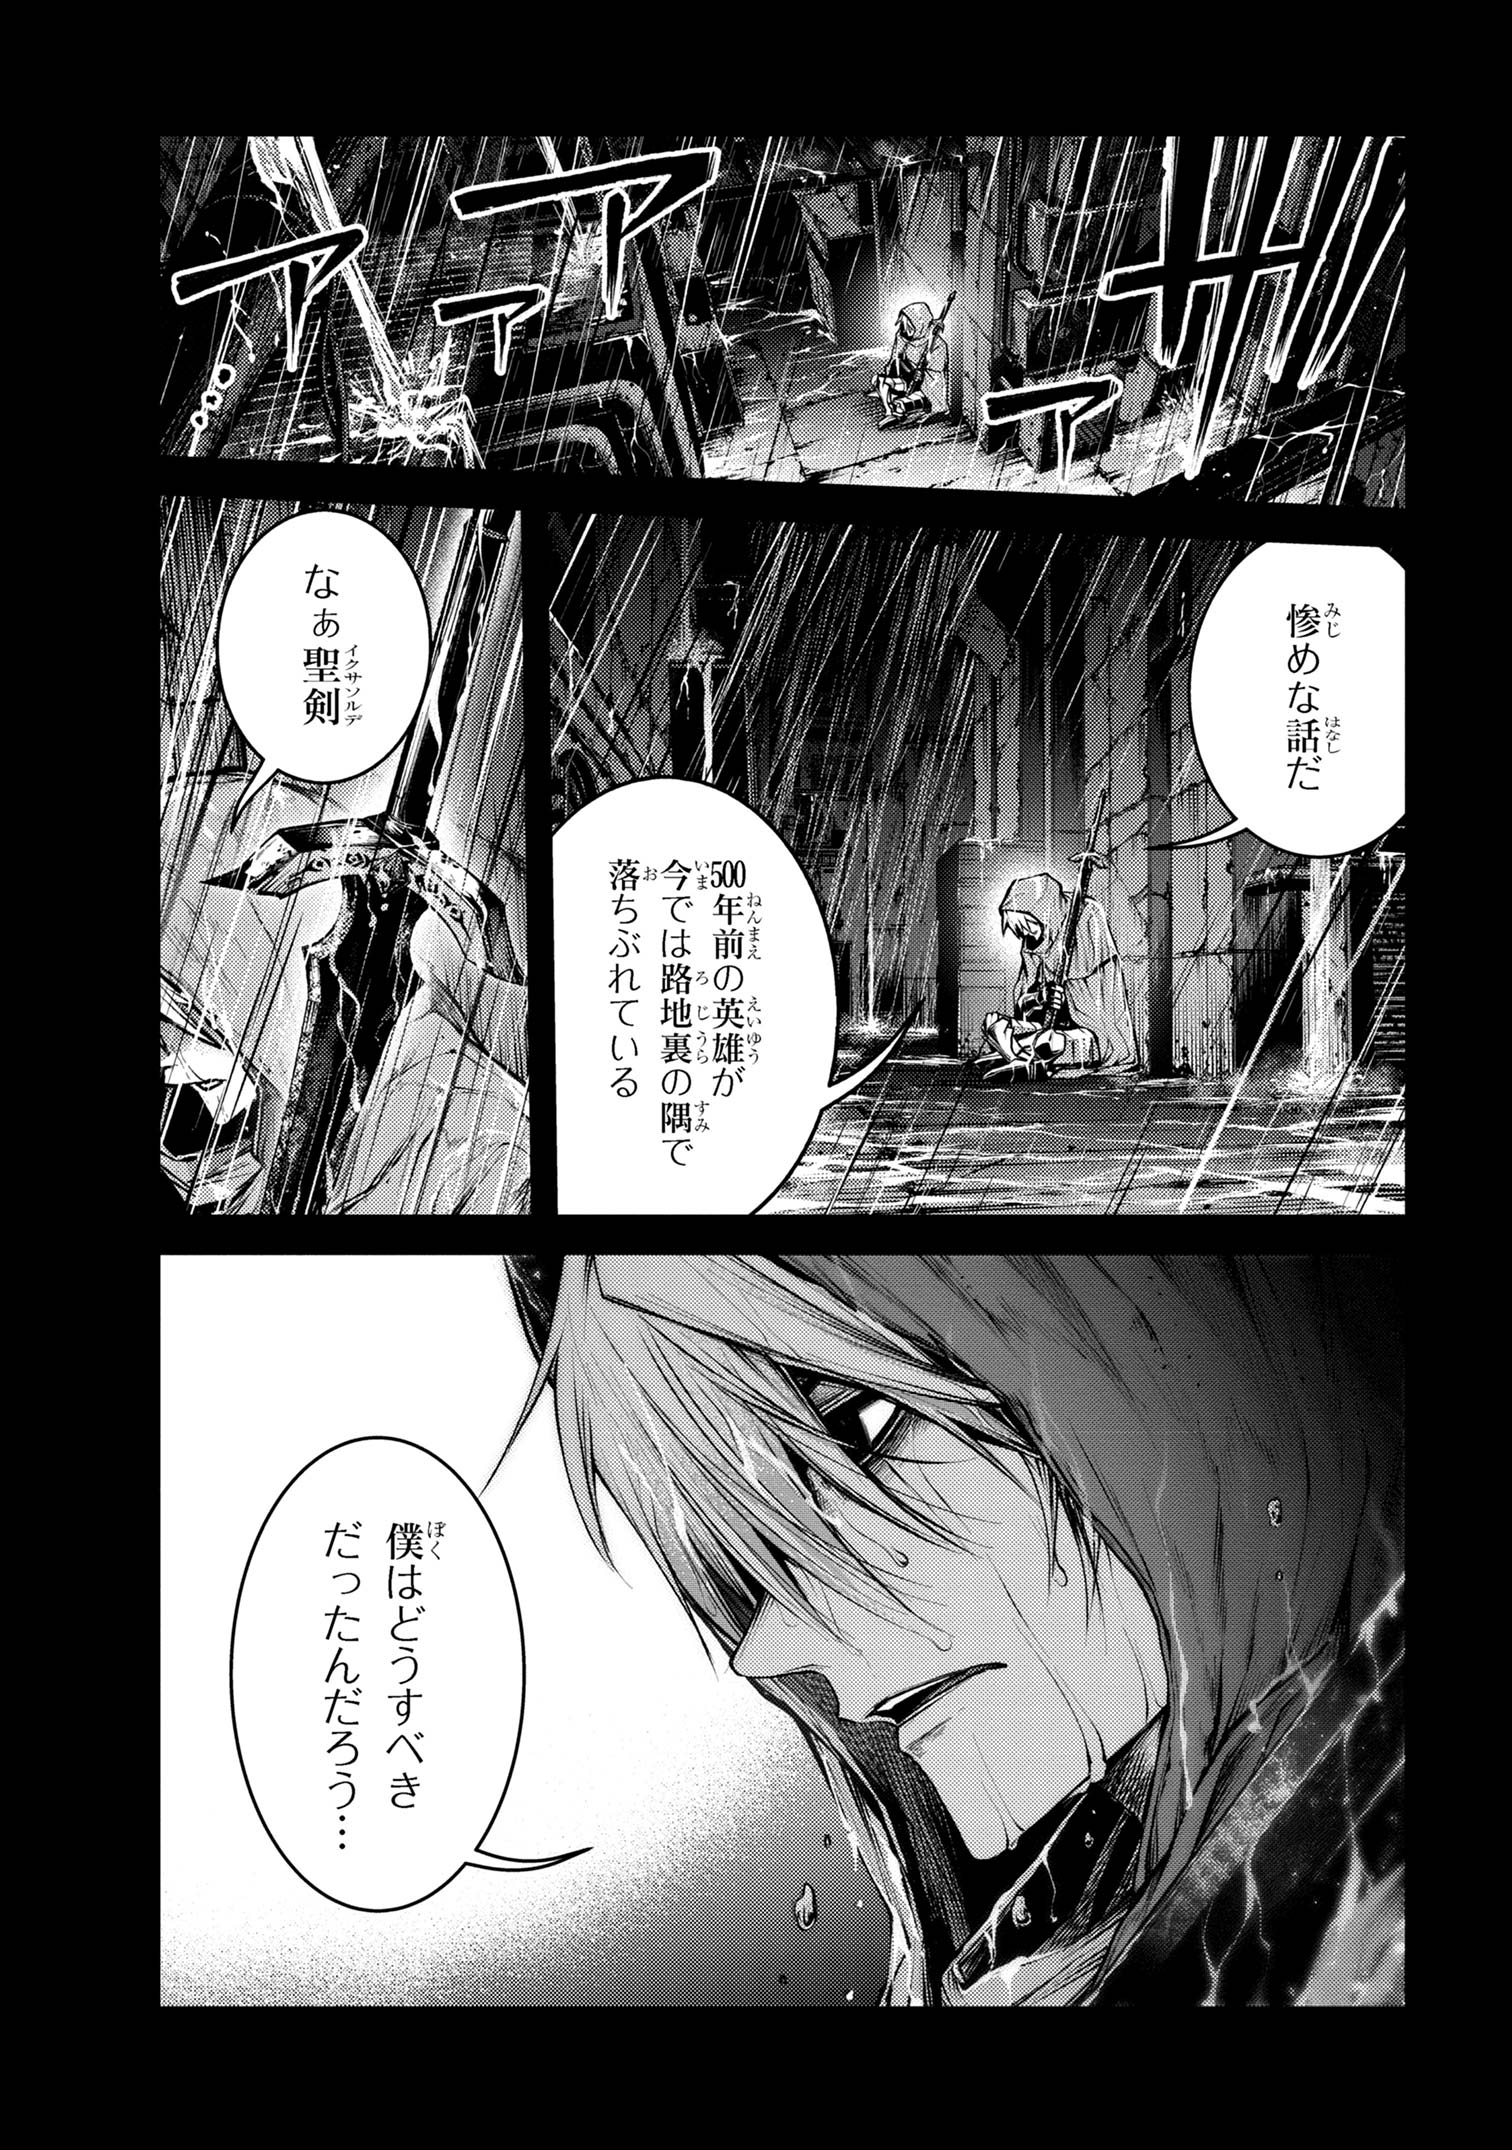 Maou 2099 - Chapter 9.1 - Page 3